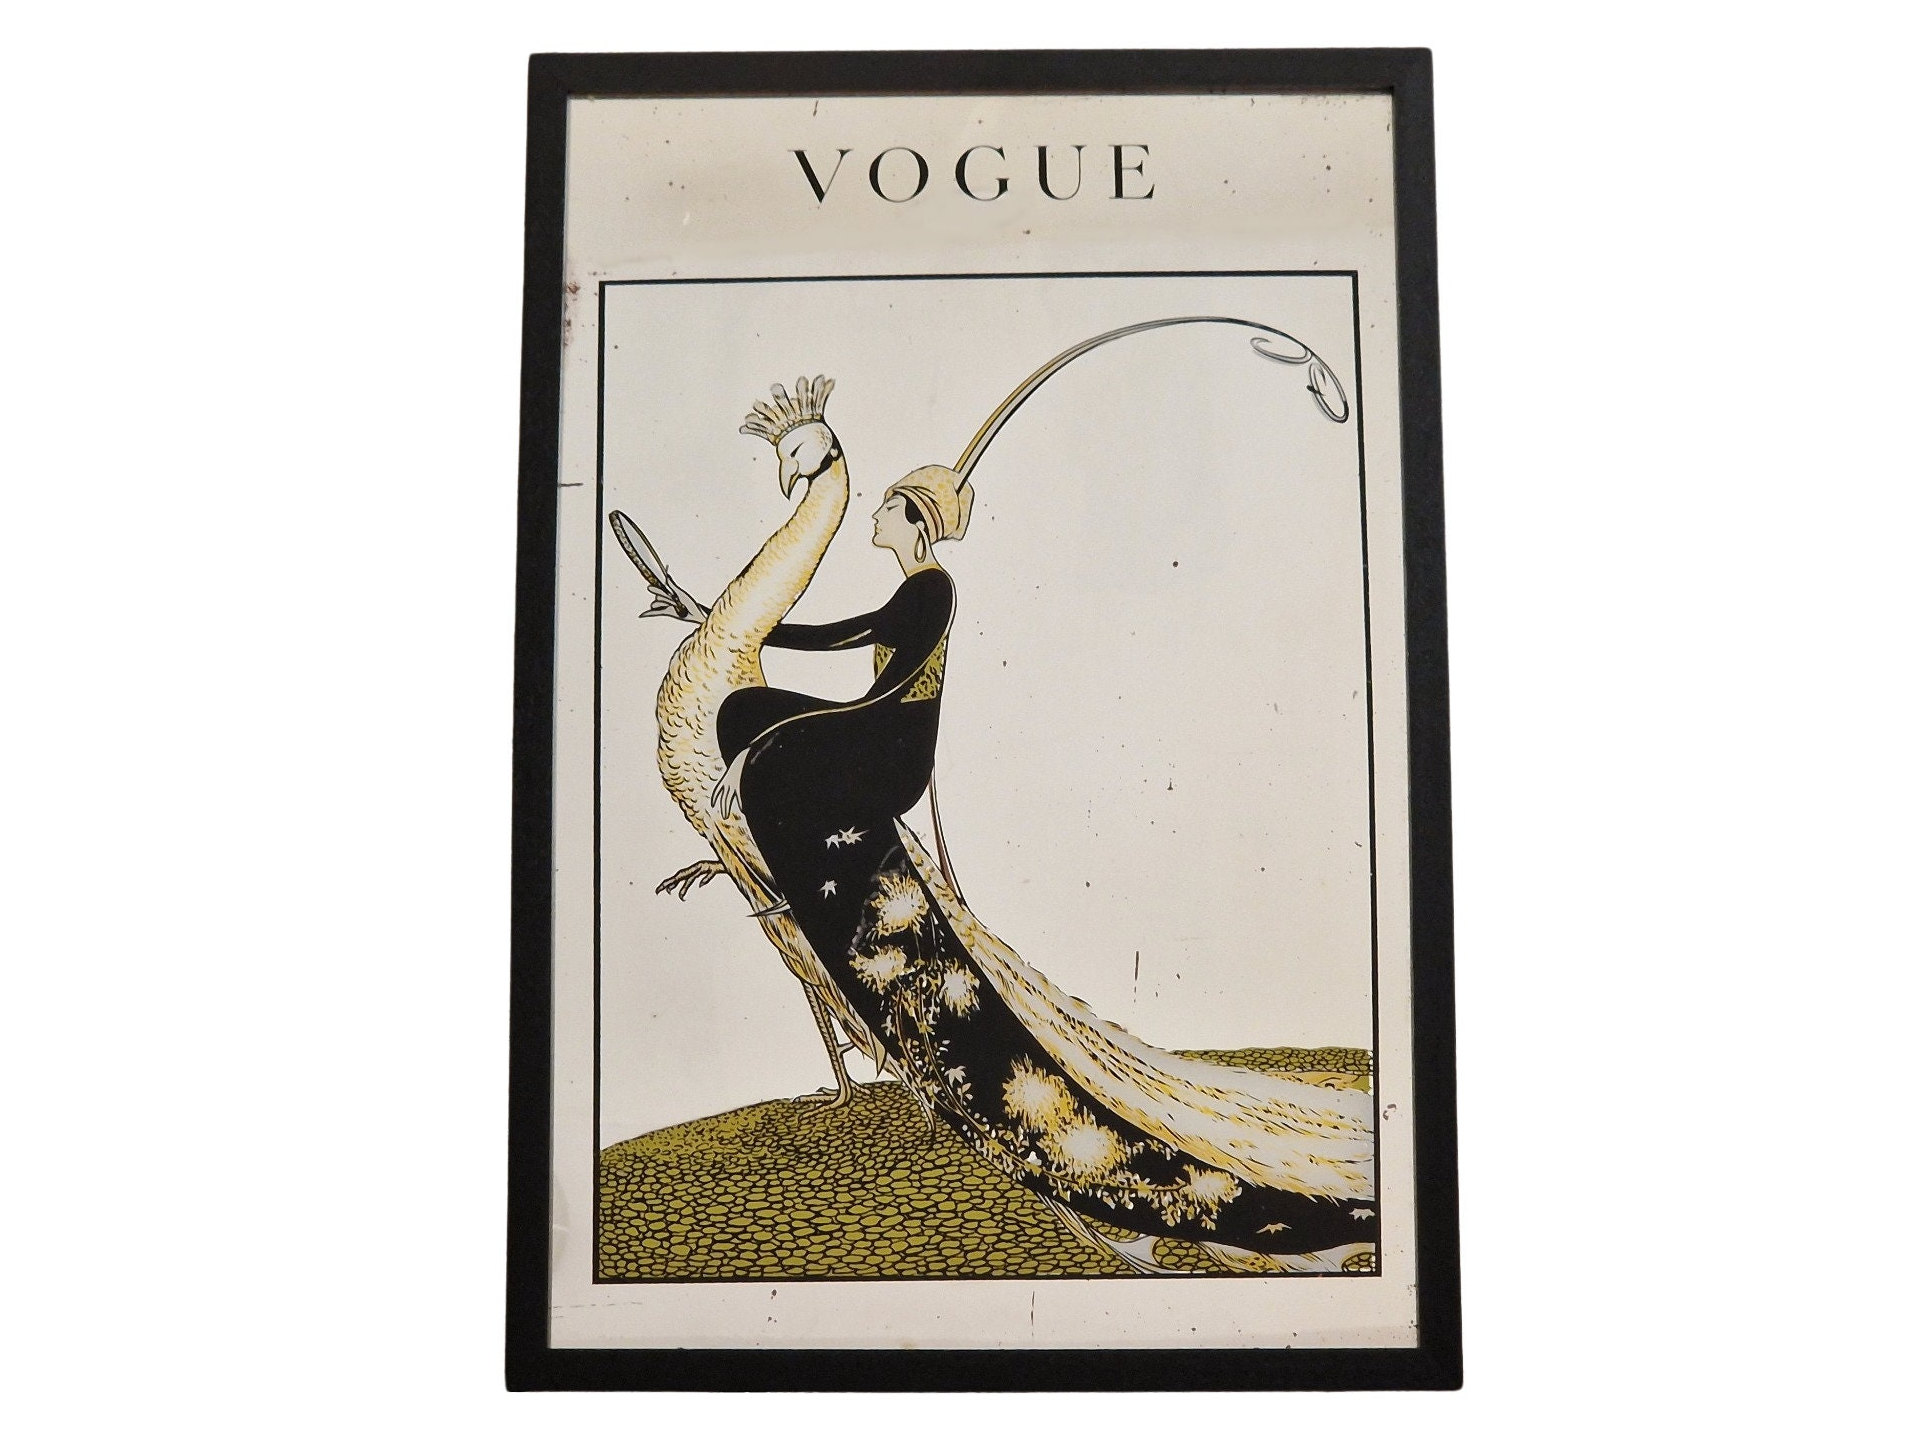 A Vogue Cover Of A Woman Reading A Vogue Book Framed Print